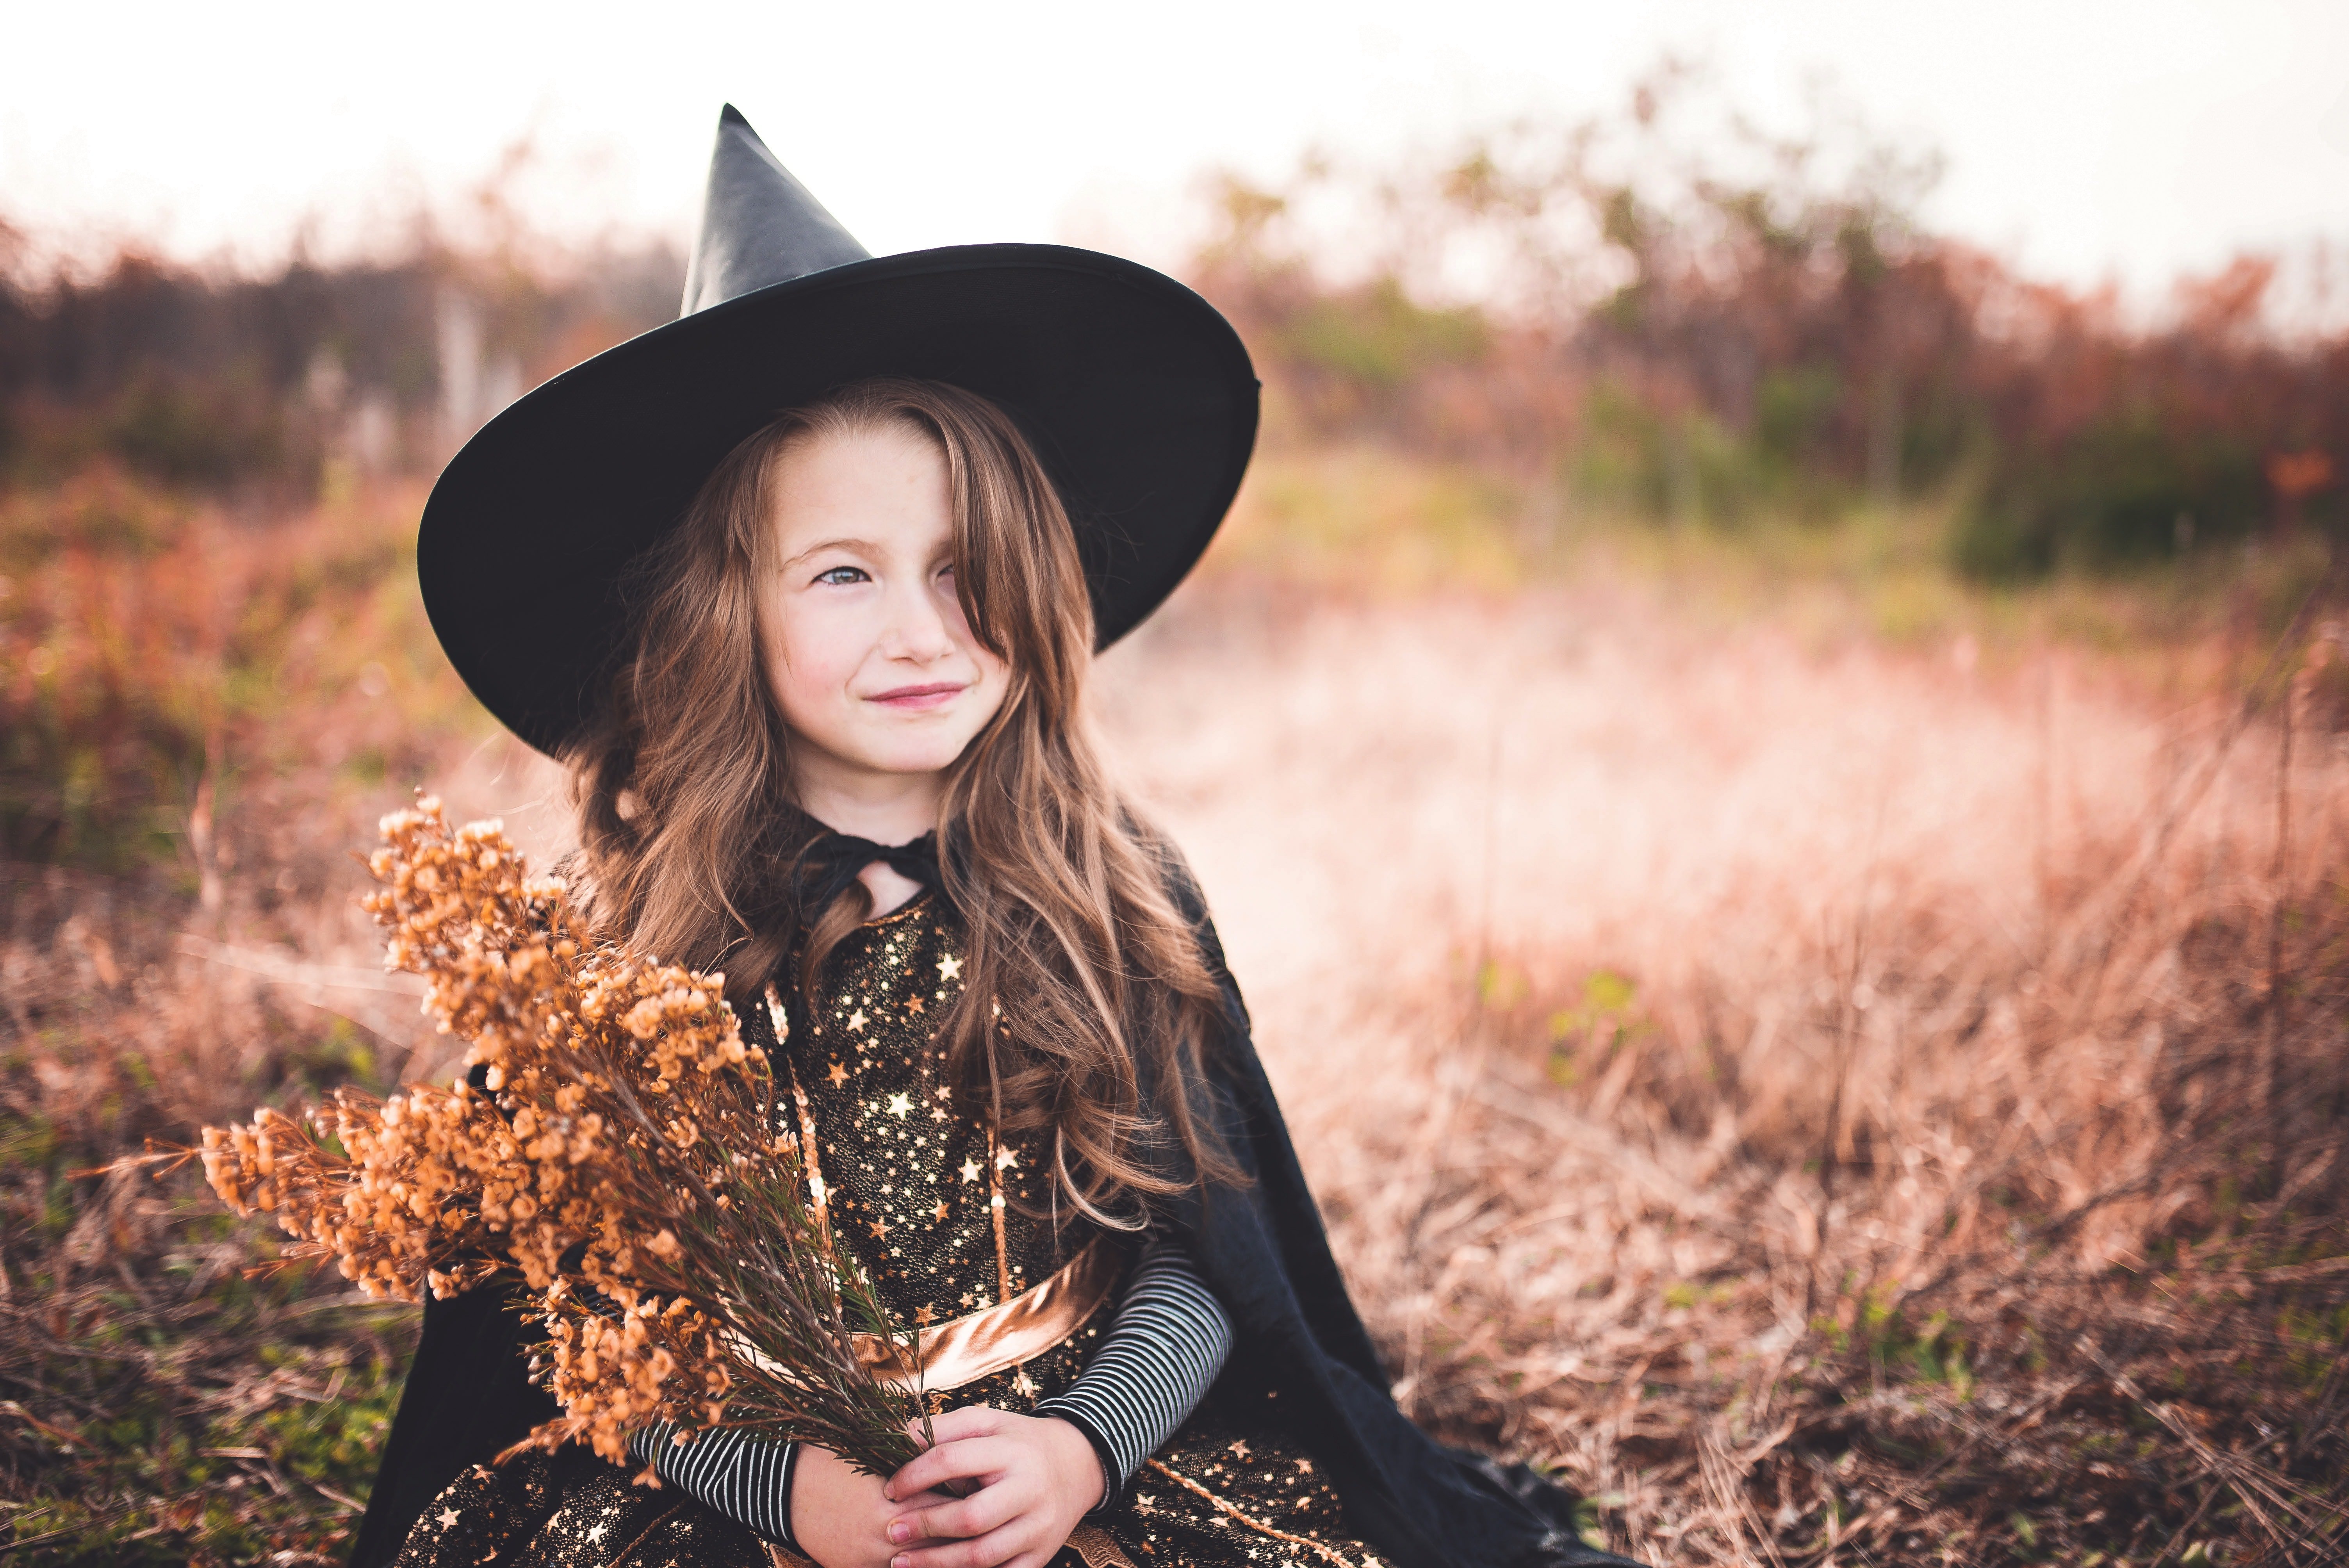 Ruth's costume won the first prize | Photo: Unsplash